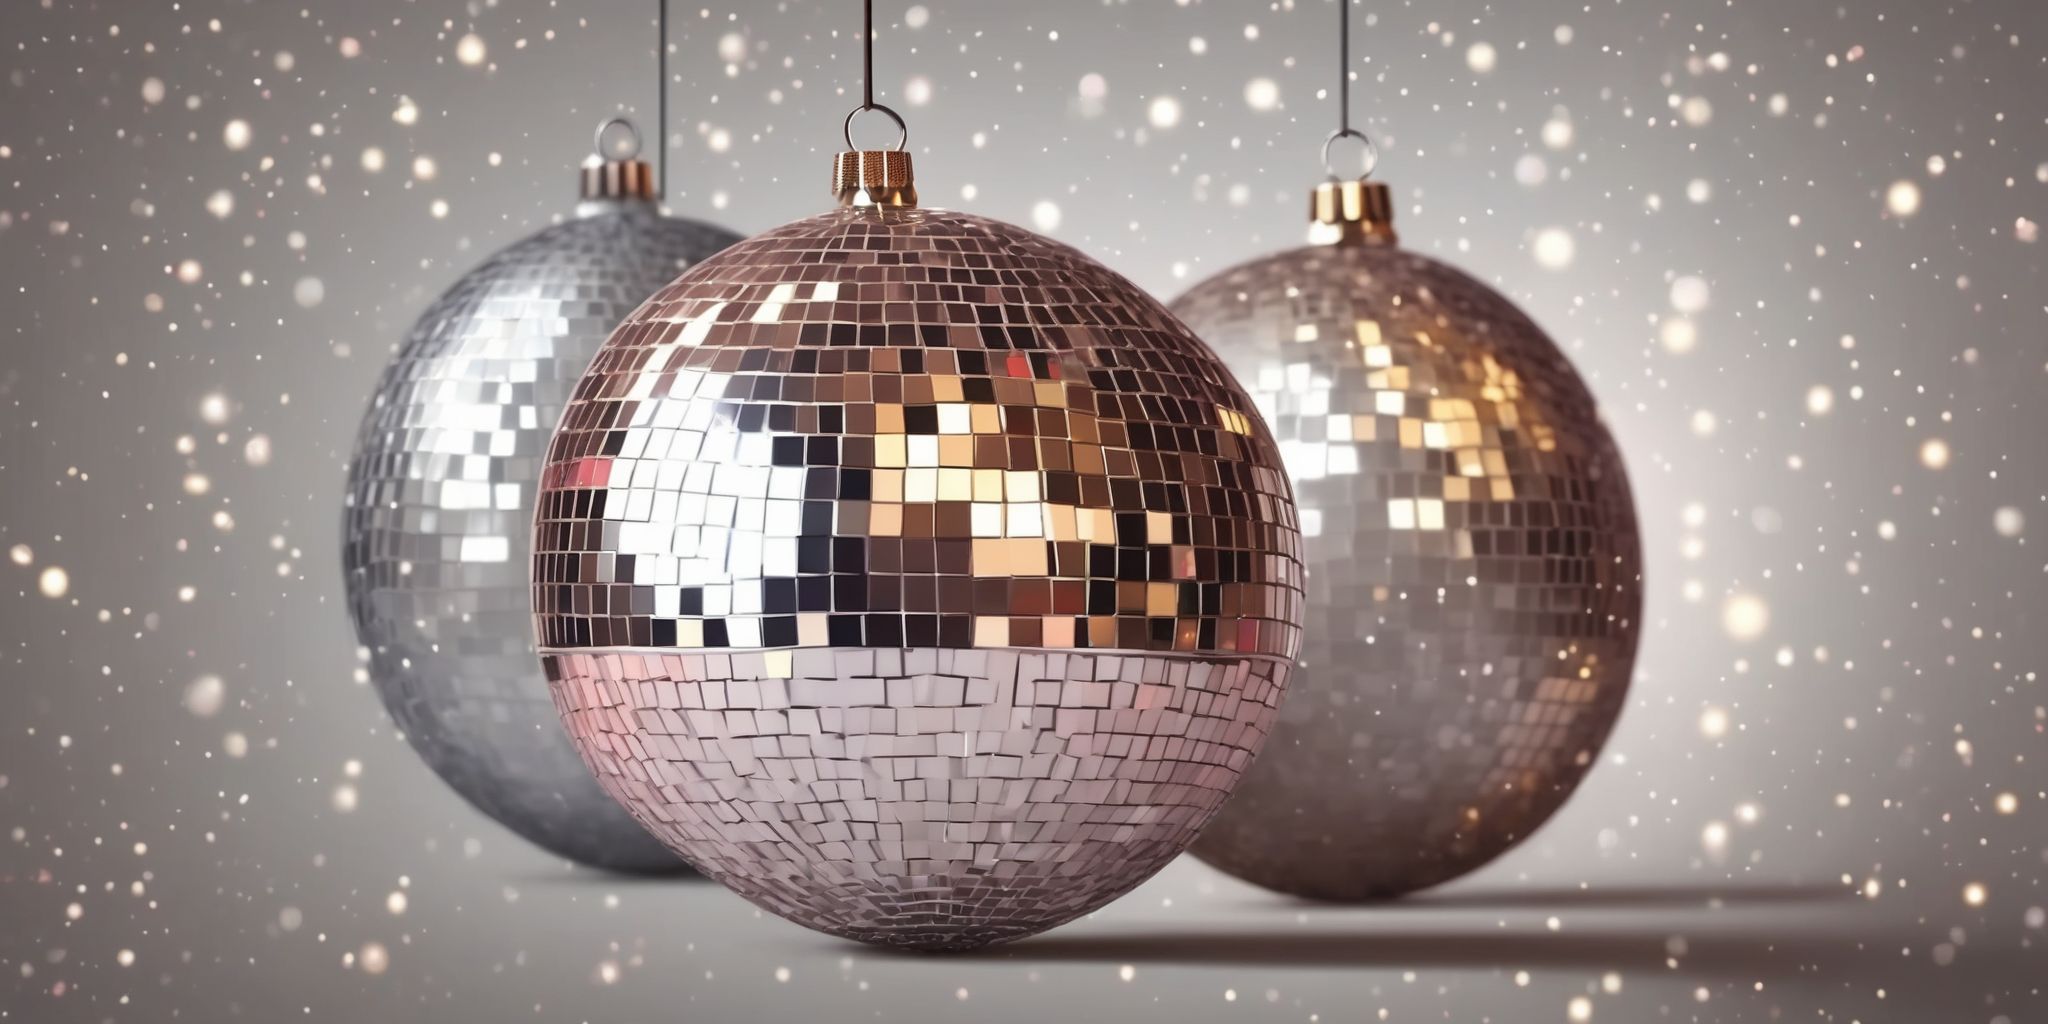 Disco ball in realistic Christmas style